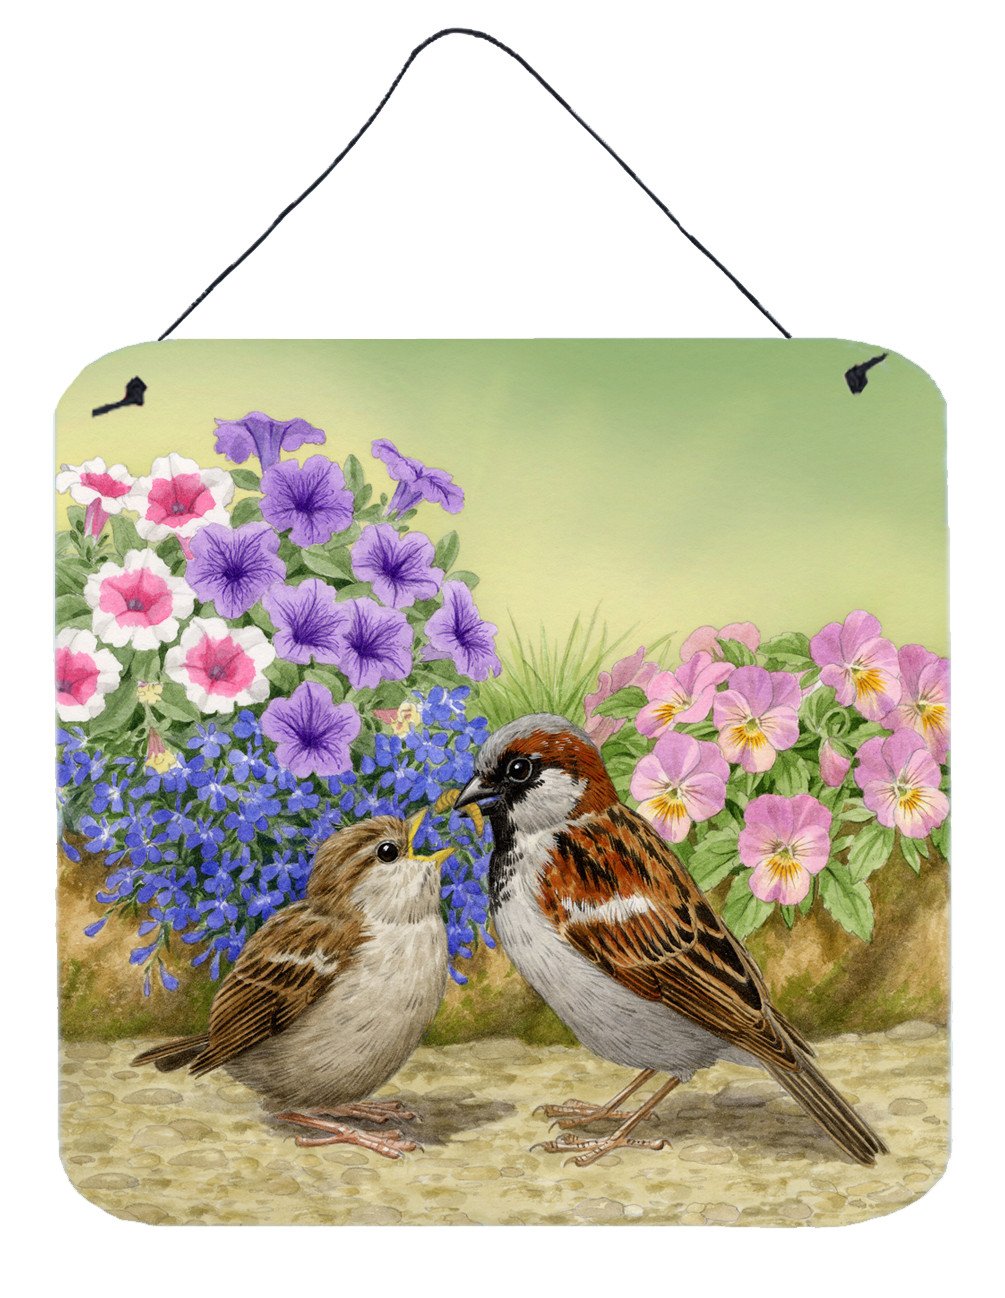 House Sparrows Feeding Time Wall or Door Hanging Prints ASAD0700DS66 by Caroline's Treasures